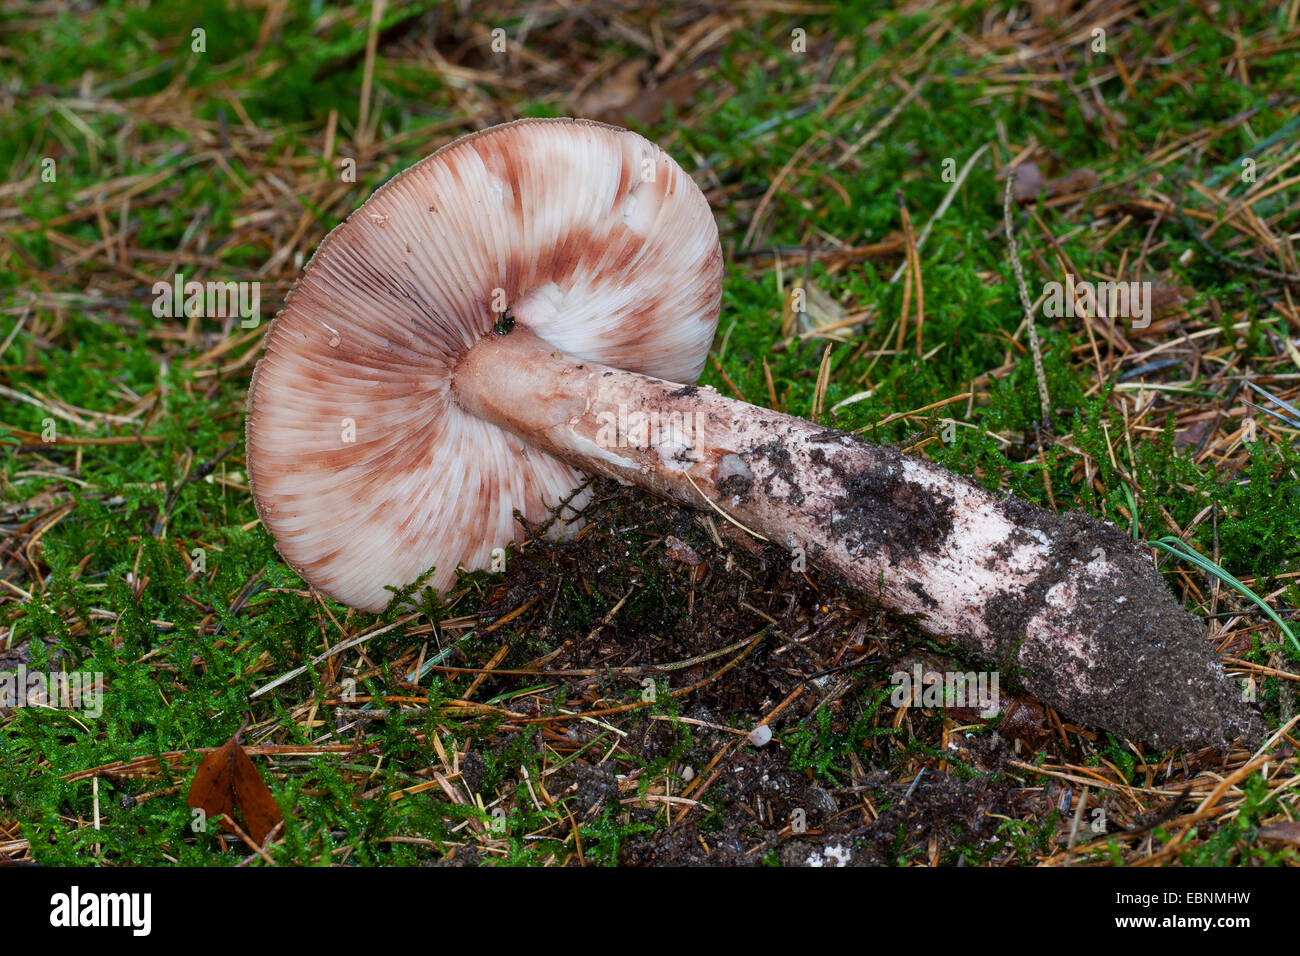 blusher (Amanita rubescens), characteristic flakes washed away by the rain, Germany Stock Photo